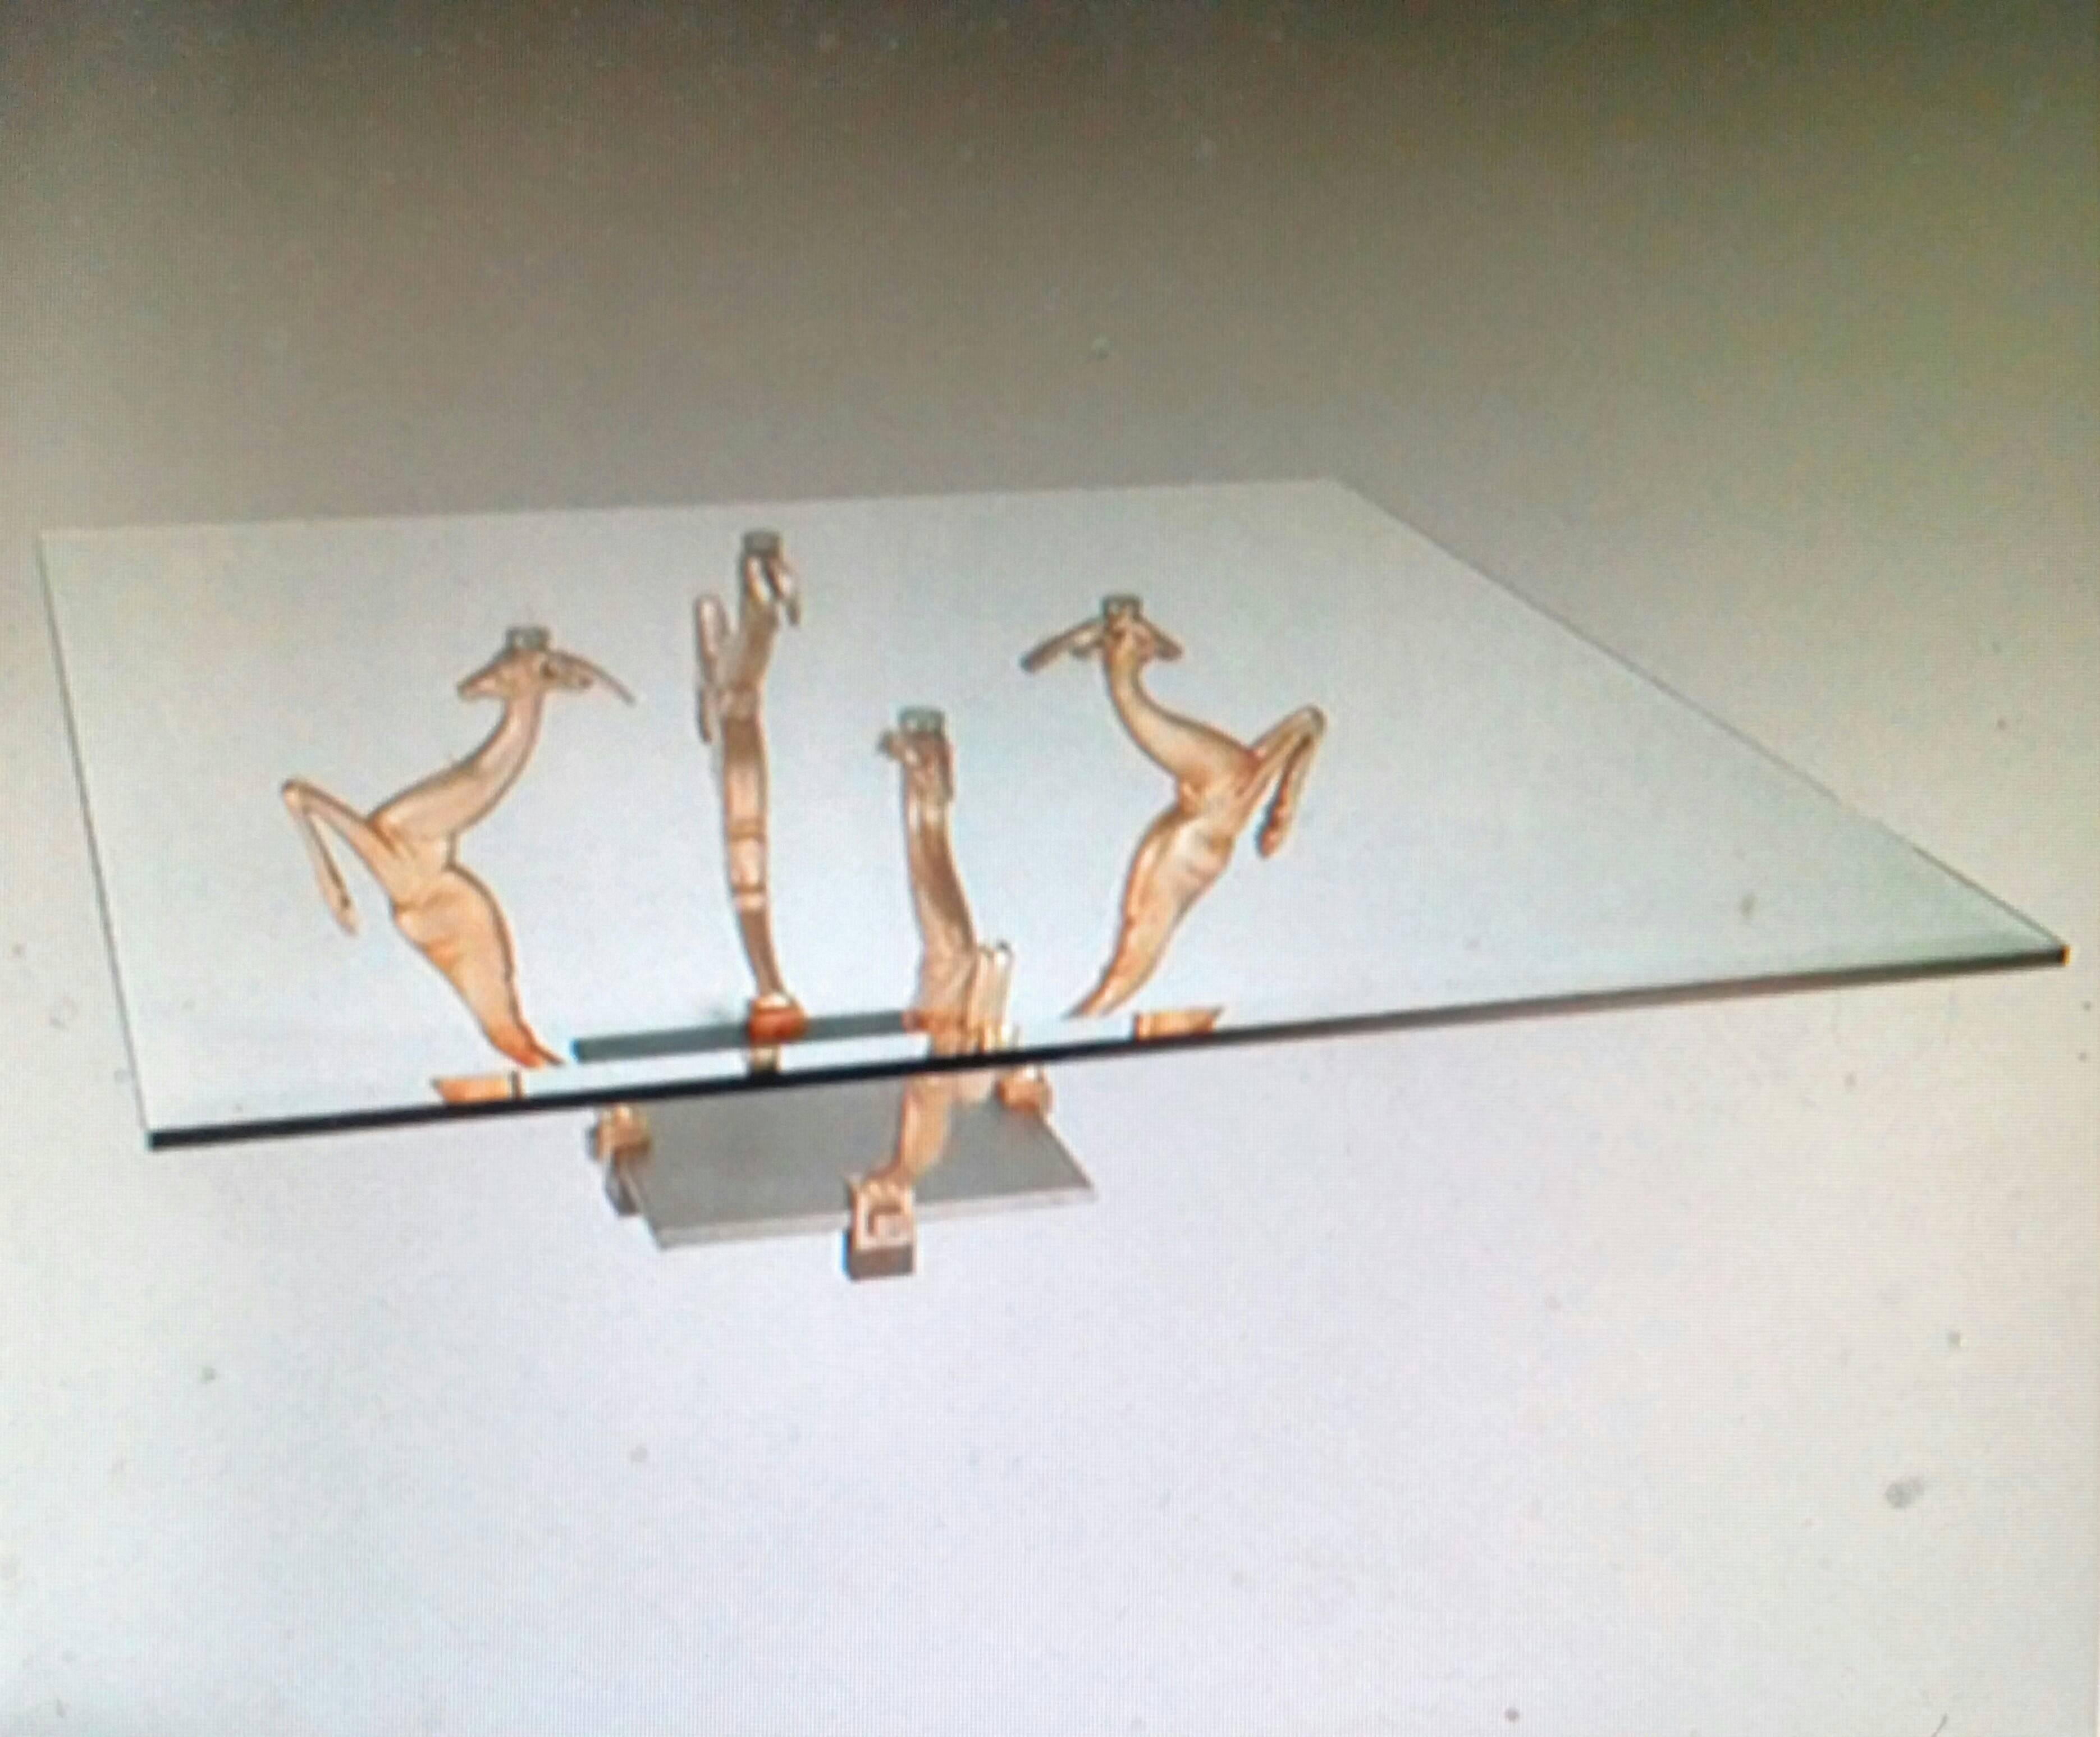 A French Art Deco two-tone coffee table with four solid satin bronze antelope figurines leaping gracefully from a quadrate platform of satin nickel finish raised by four legs. The table can be re-plated upon request. We are the rare source that